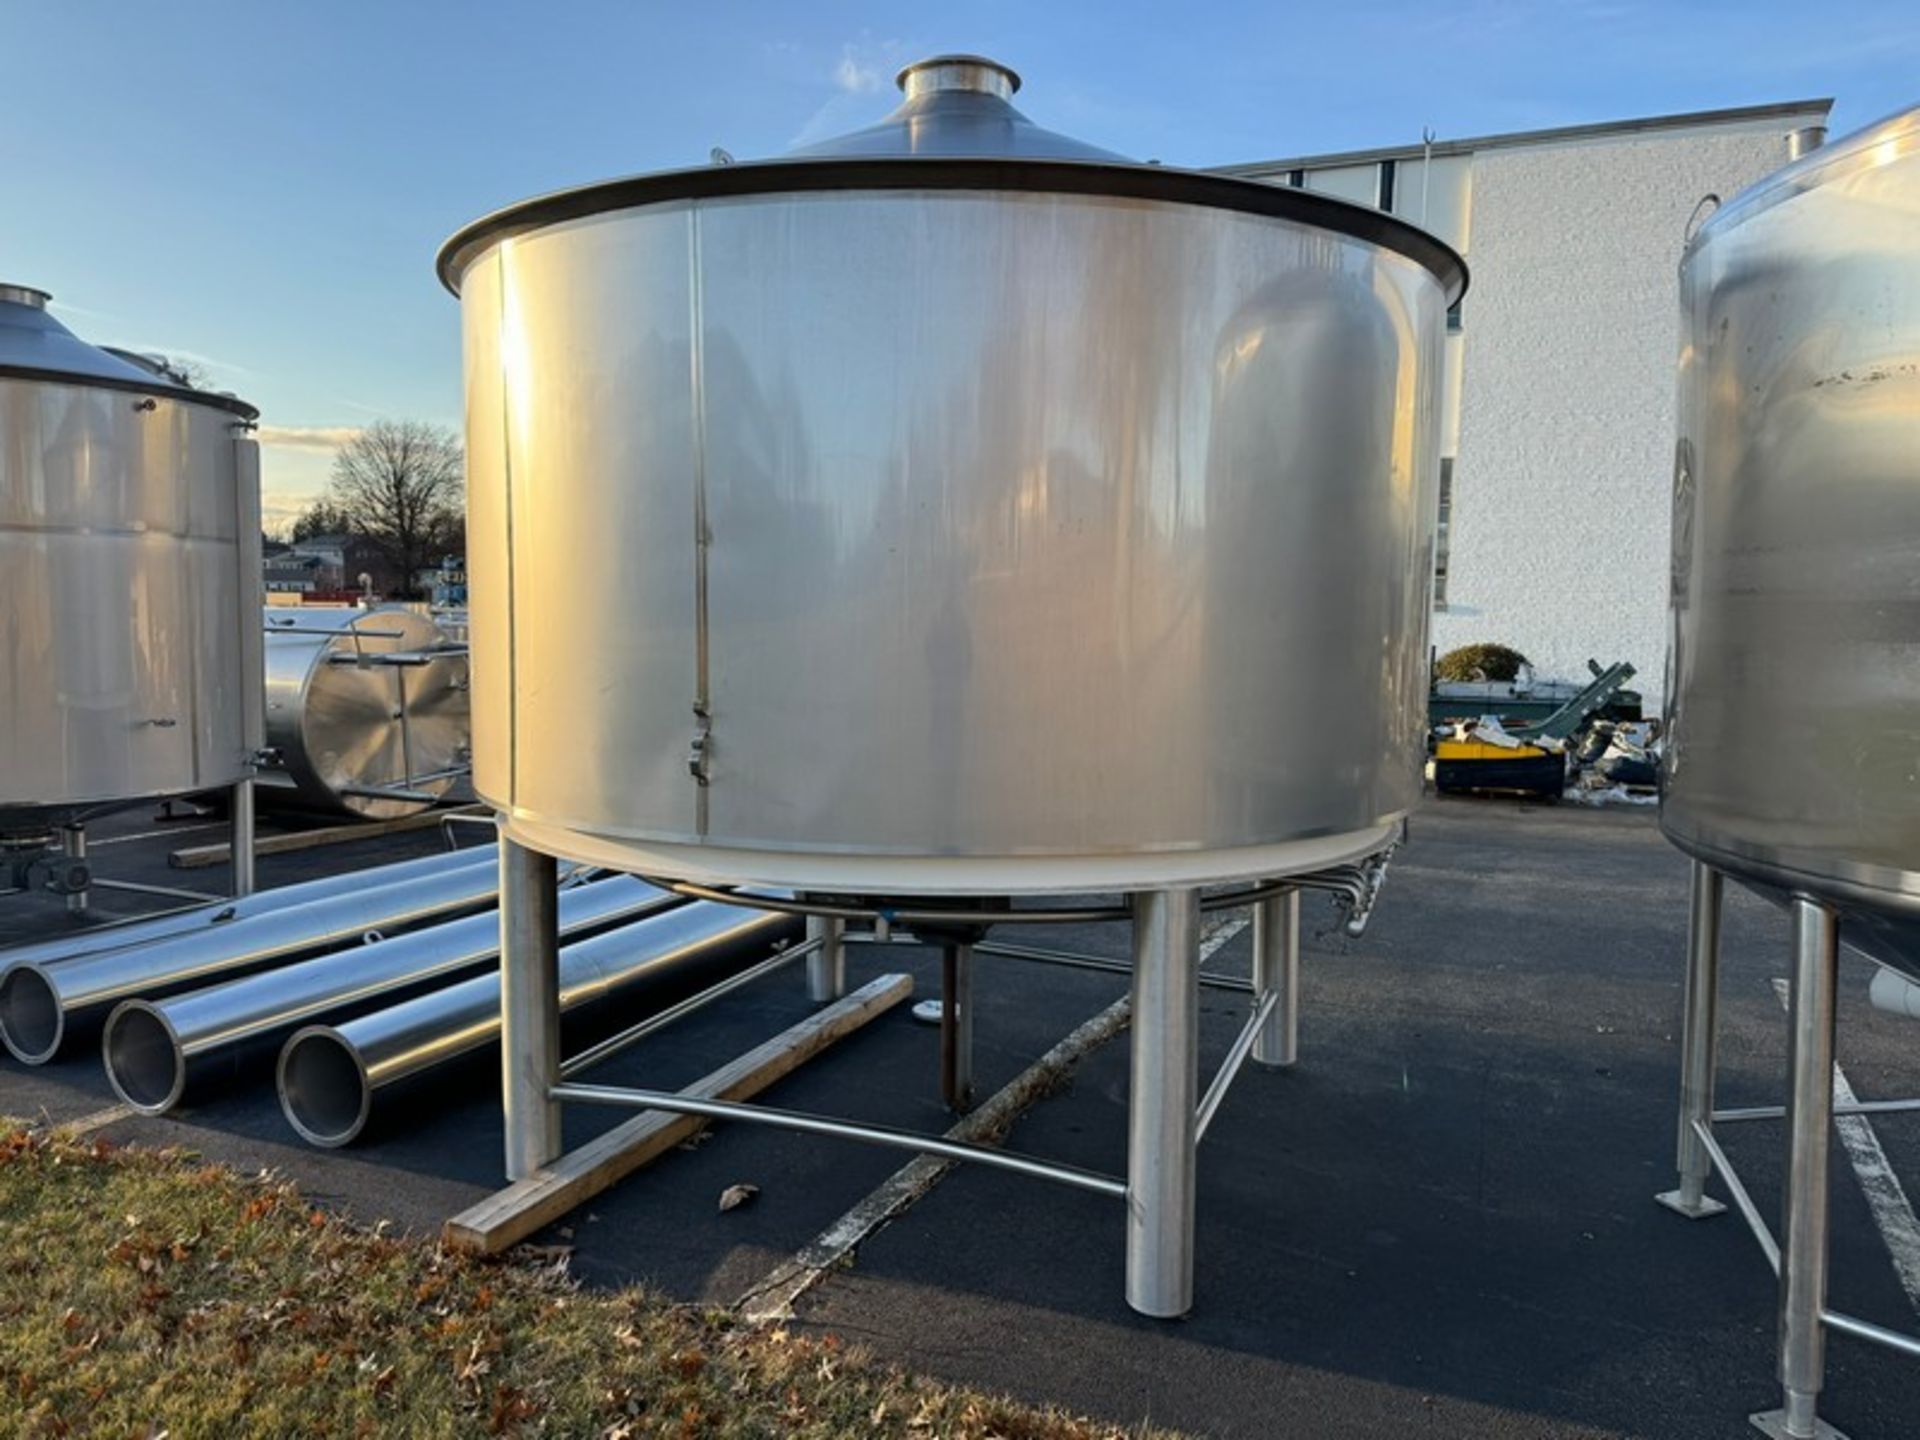 2012 Specific Mechanical Systems 45 BBL Capacity S/S Lauter Tun Tank, S/N RMP-136-12, with Legs, - Image 6 of 14